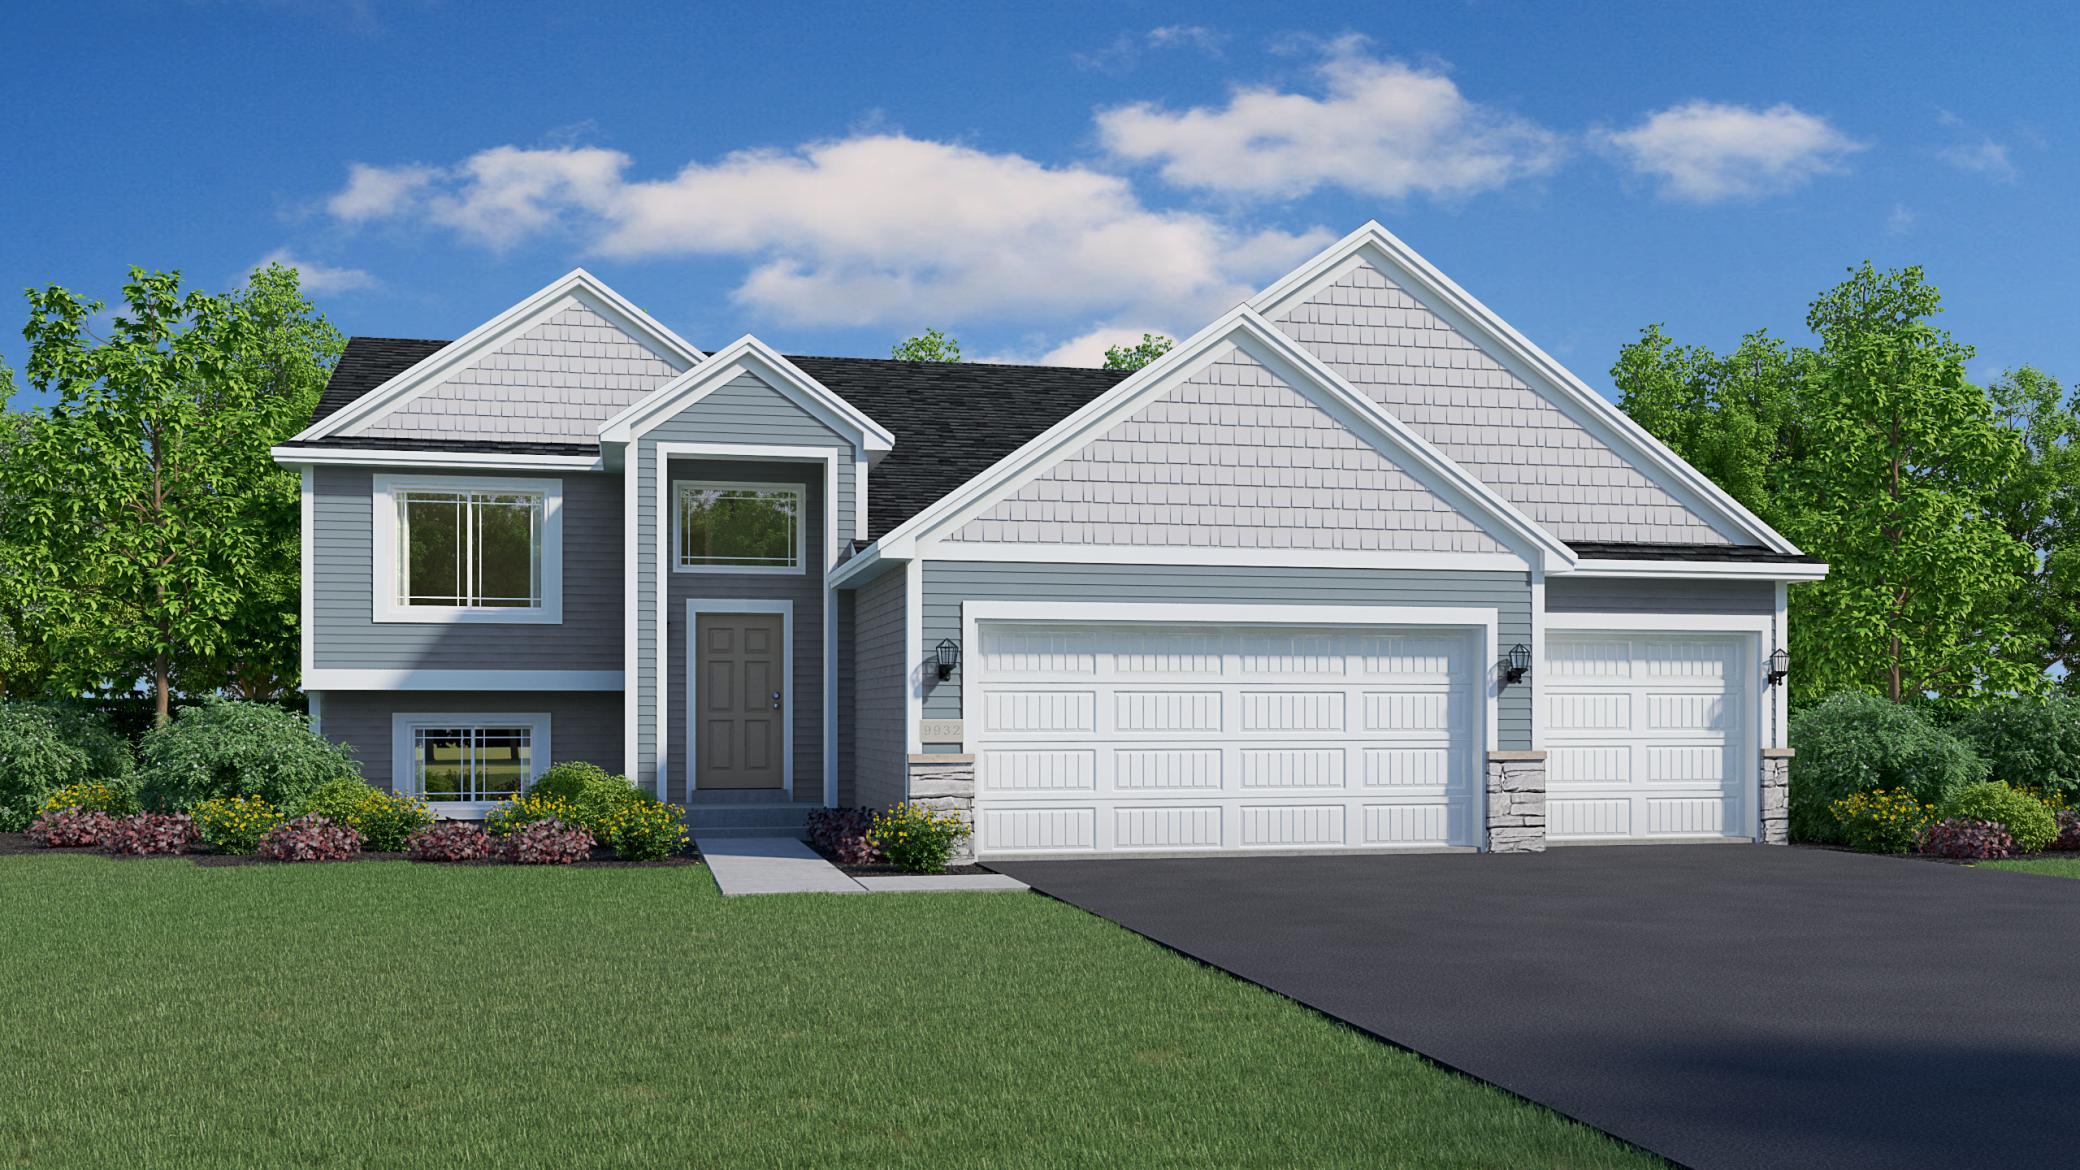 Exterior rendering showcases the color scheme. Features include an unfinished walkout lower level, Pella windows, stone accents, sod, irrigation system, and front yard landscaping. Rendering material detail & finishes will vary.